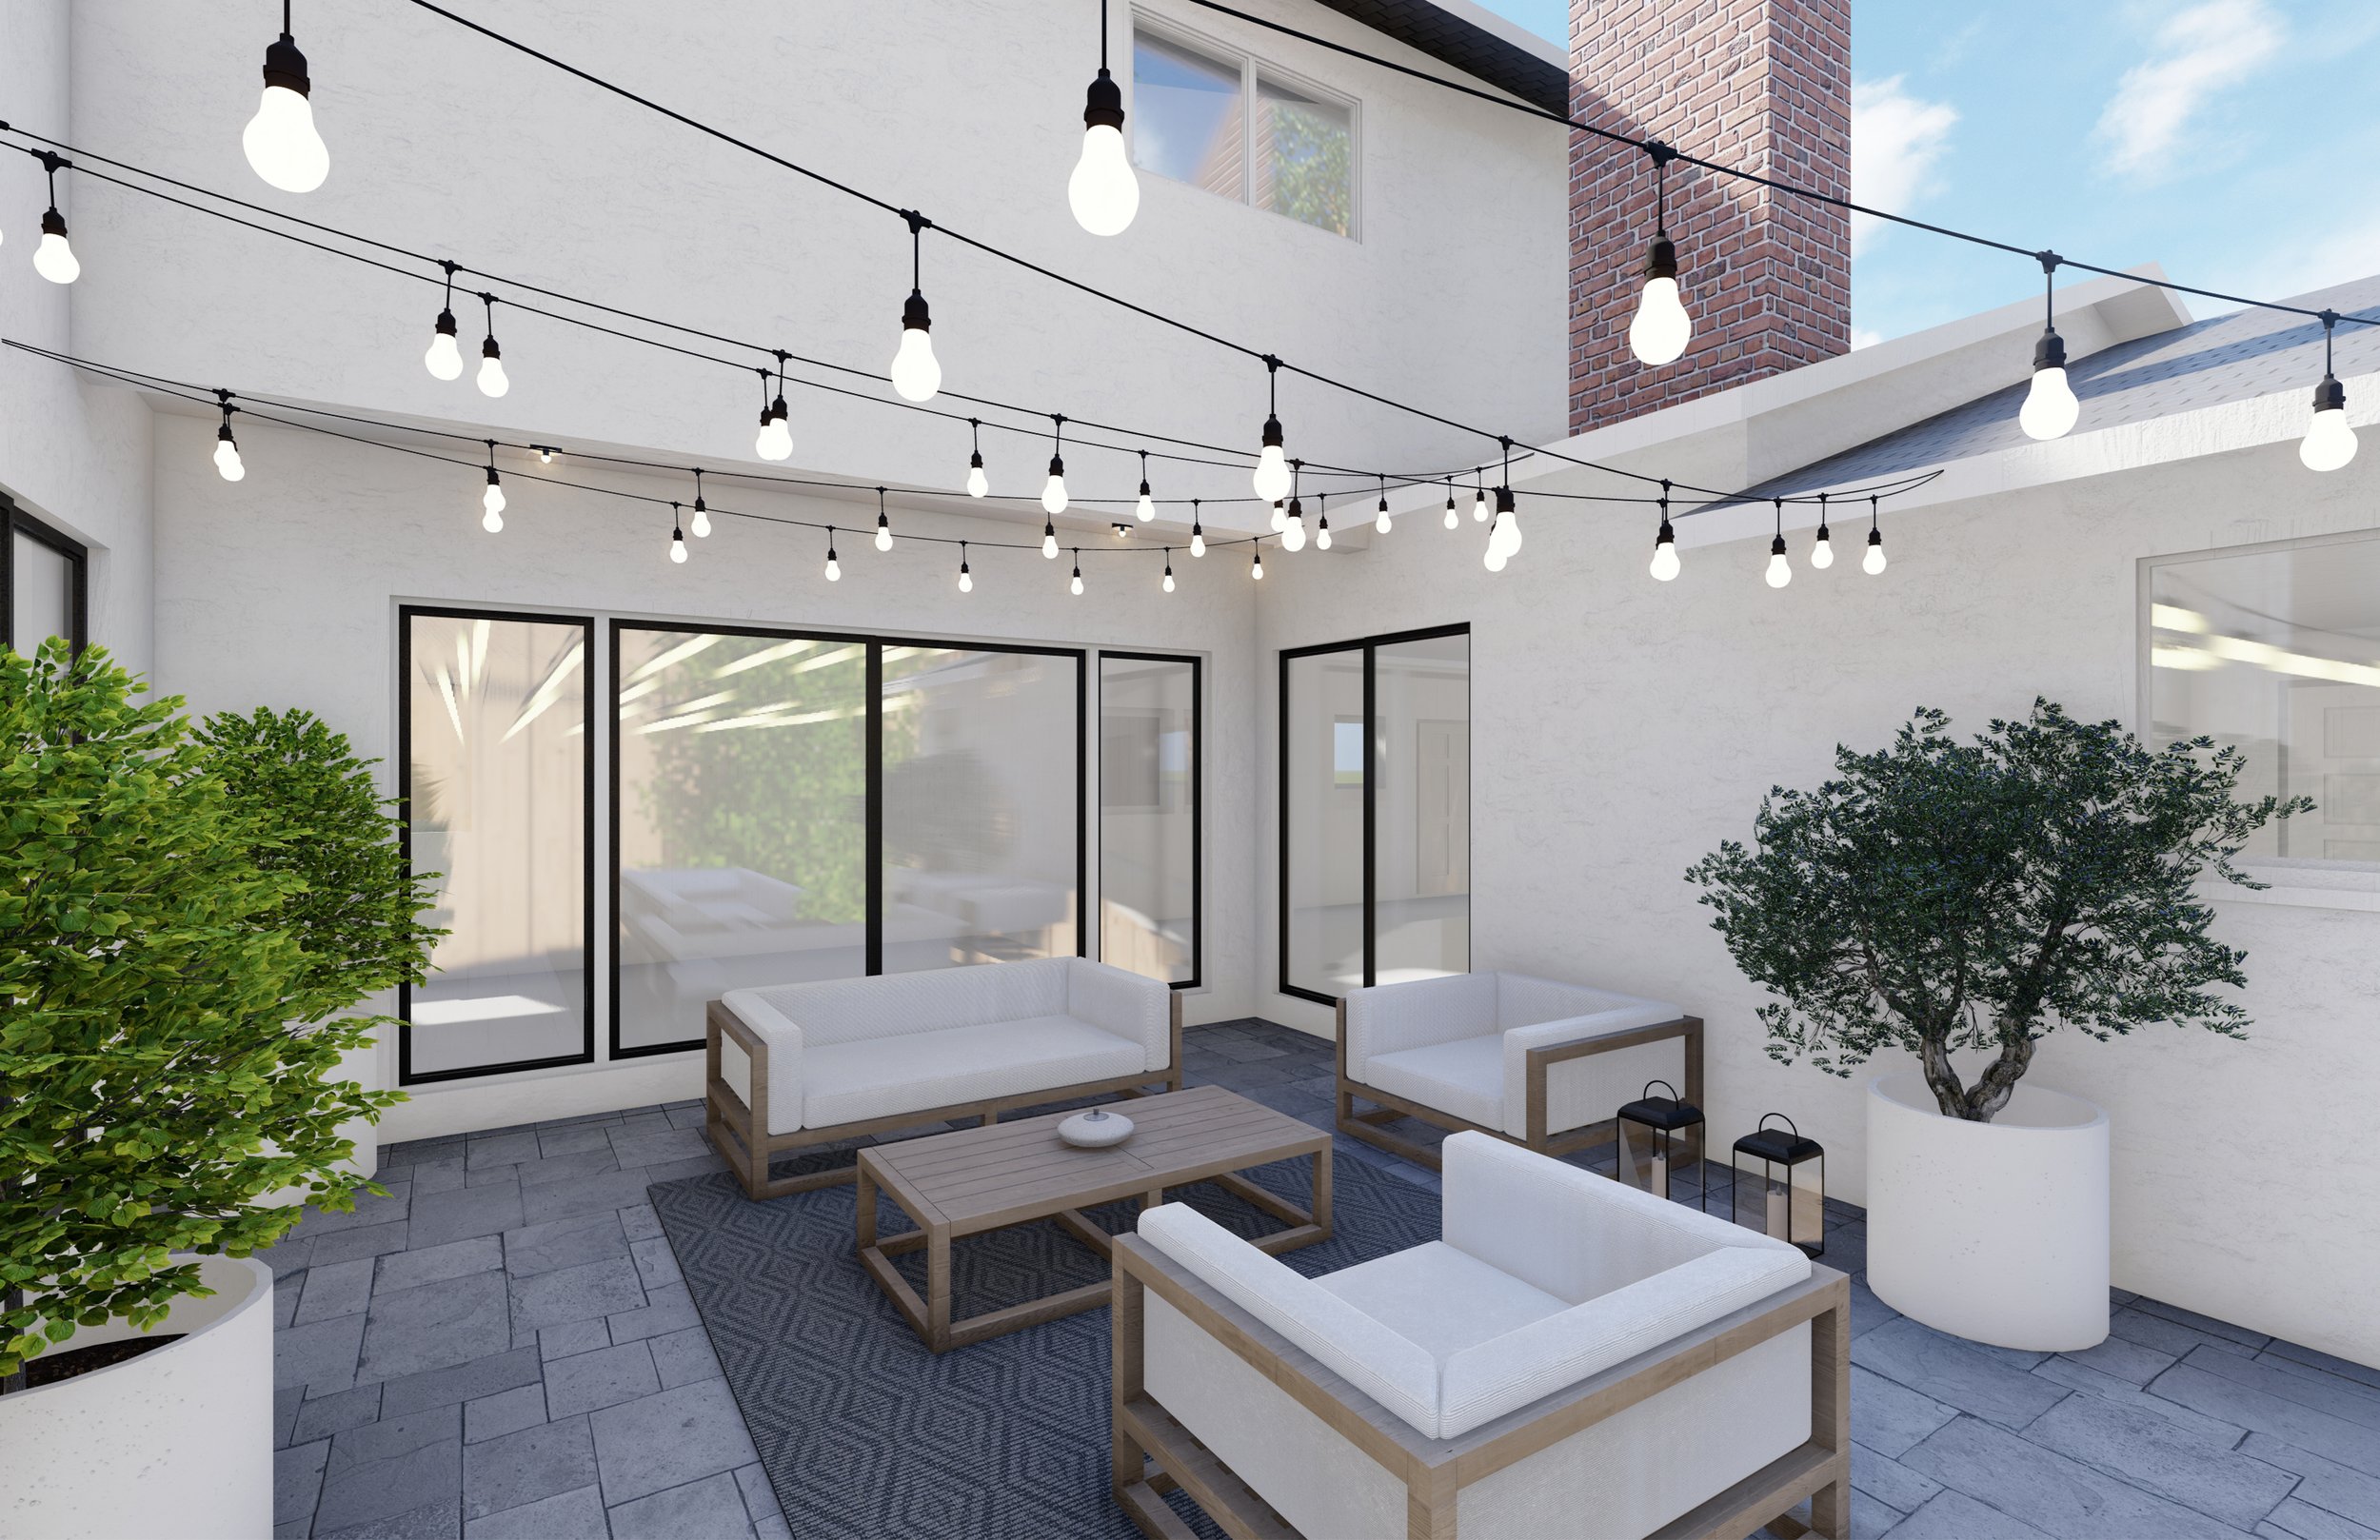 Courtyard design with concrete paver patio and teak outdoor sofa, lounge chairs, and coffee table with overhead string lights.